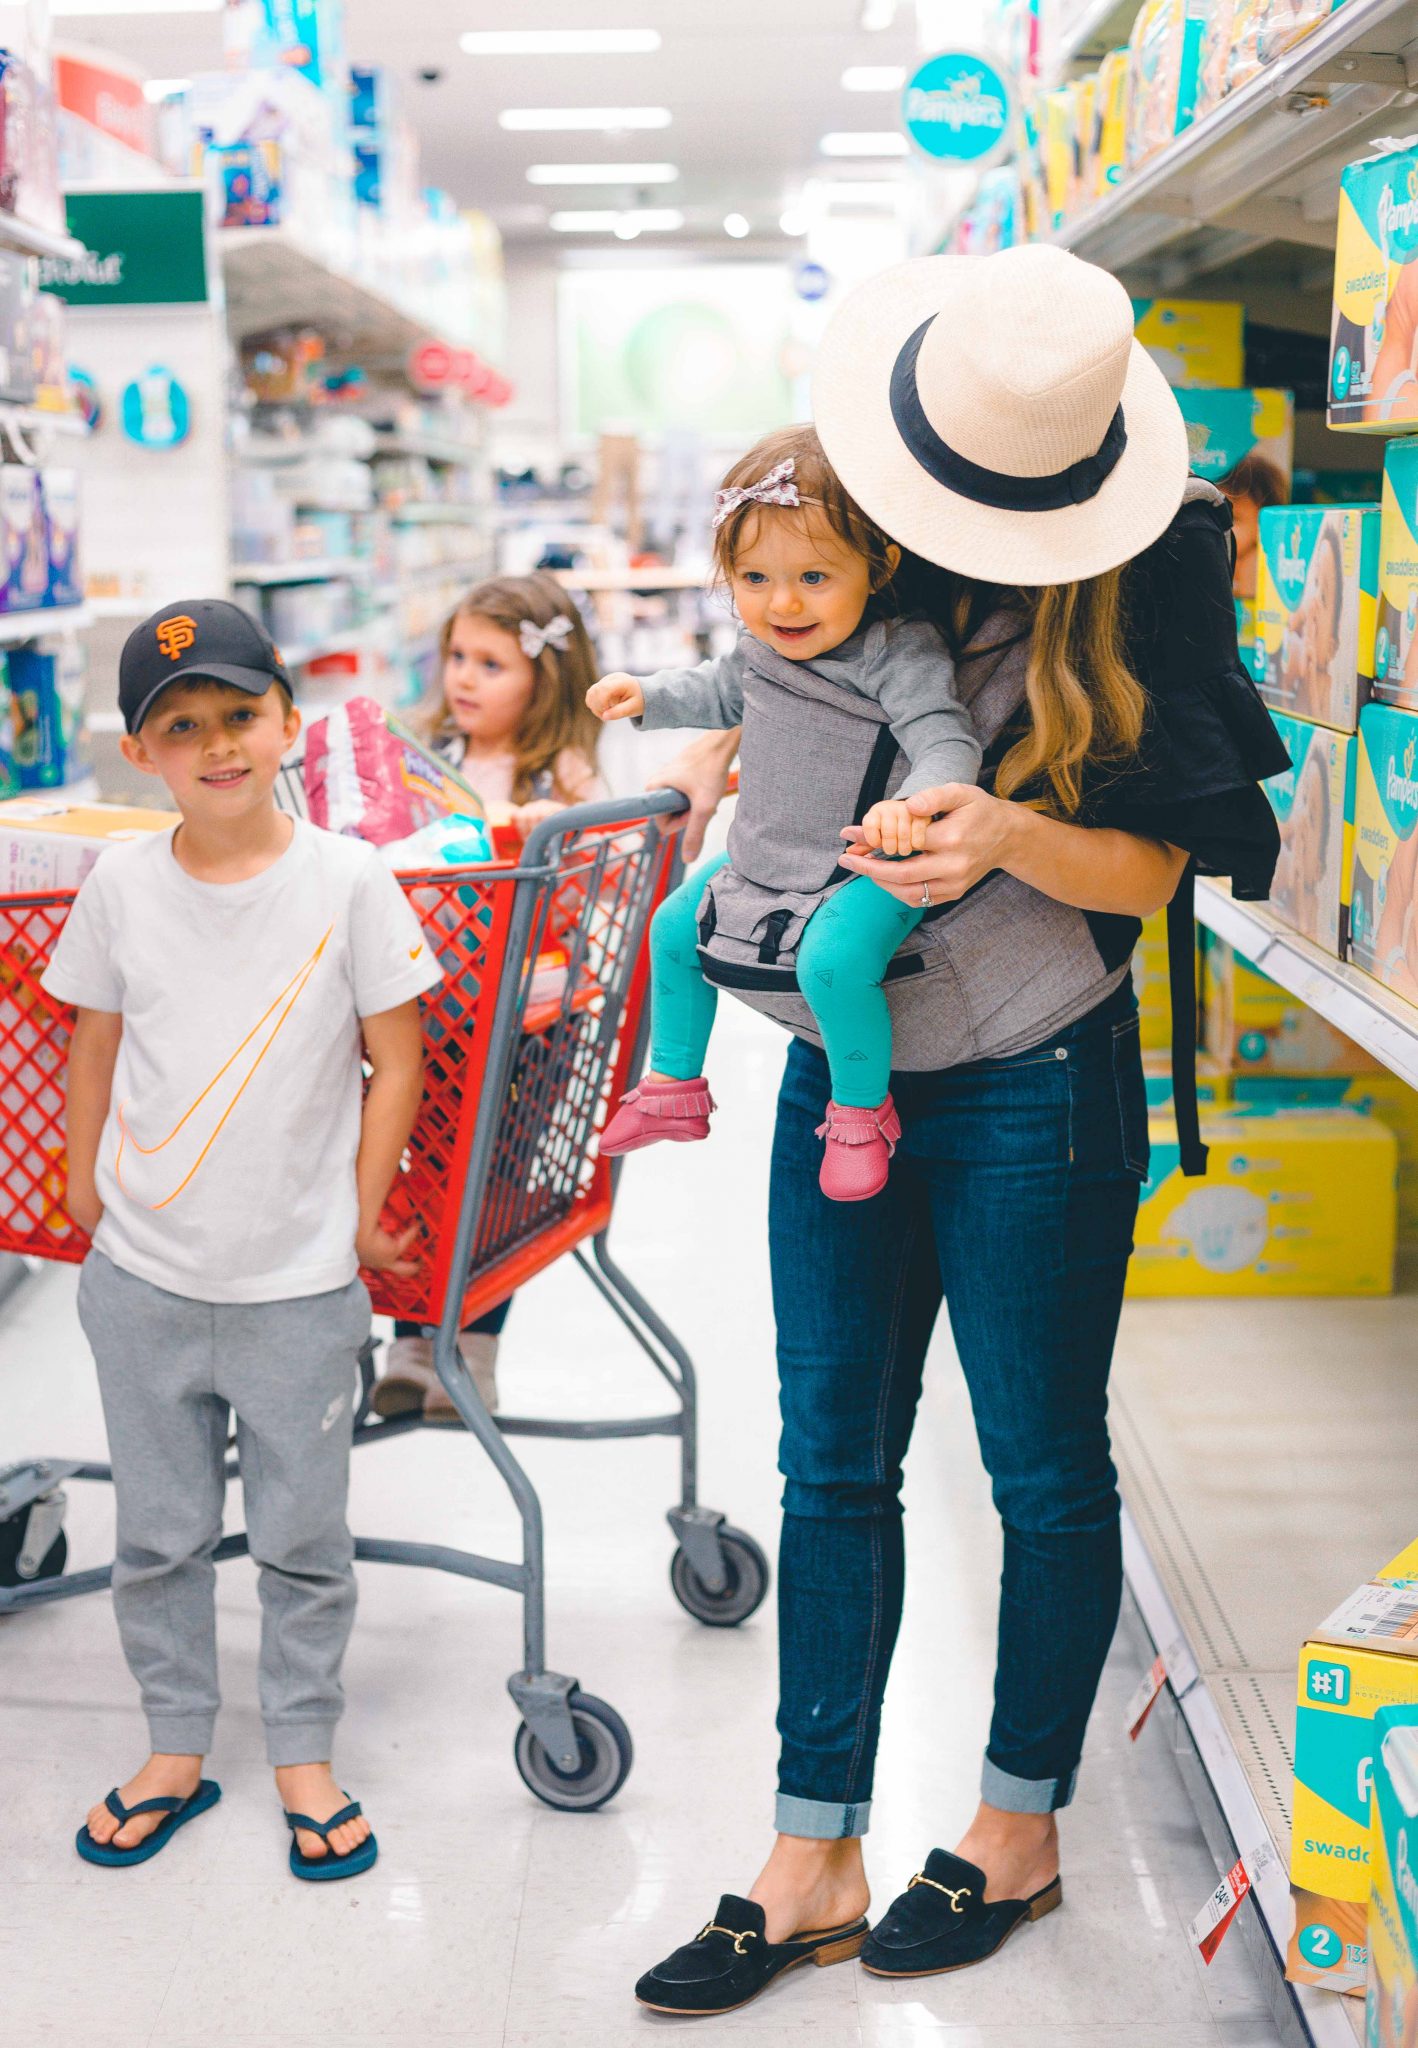 3 Tips for Grocery Shopping with Kids by San Francisco lifestyle blogger The Girl in The Yellow Dress